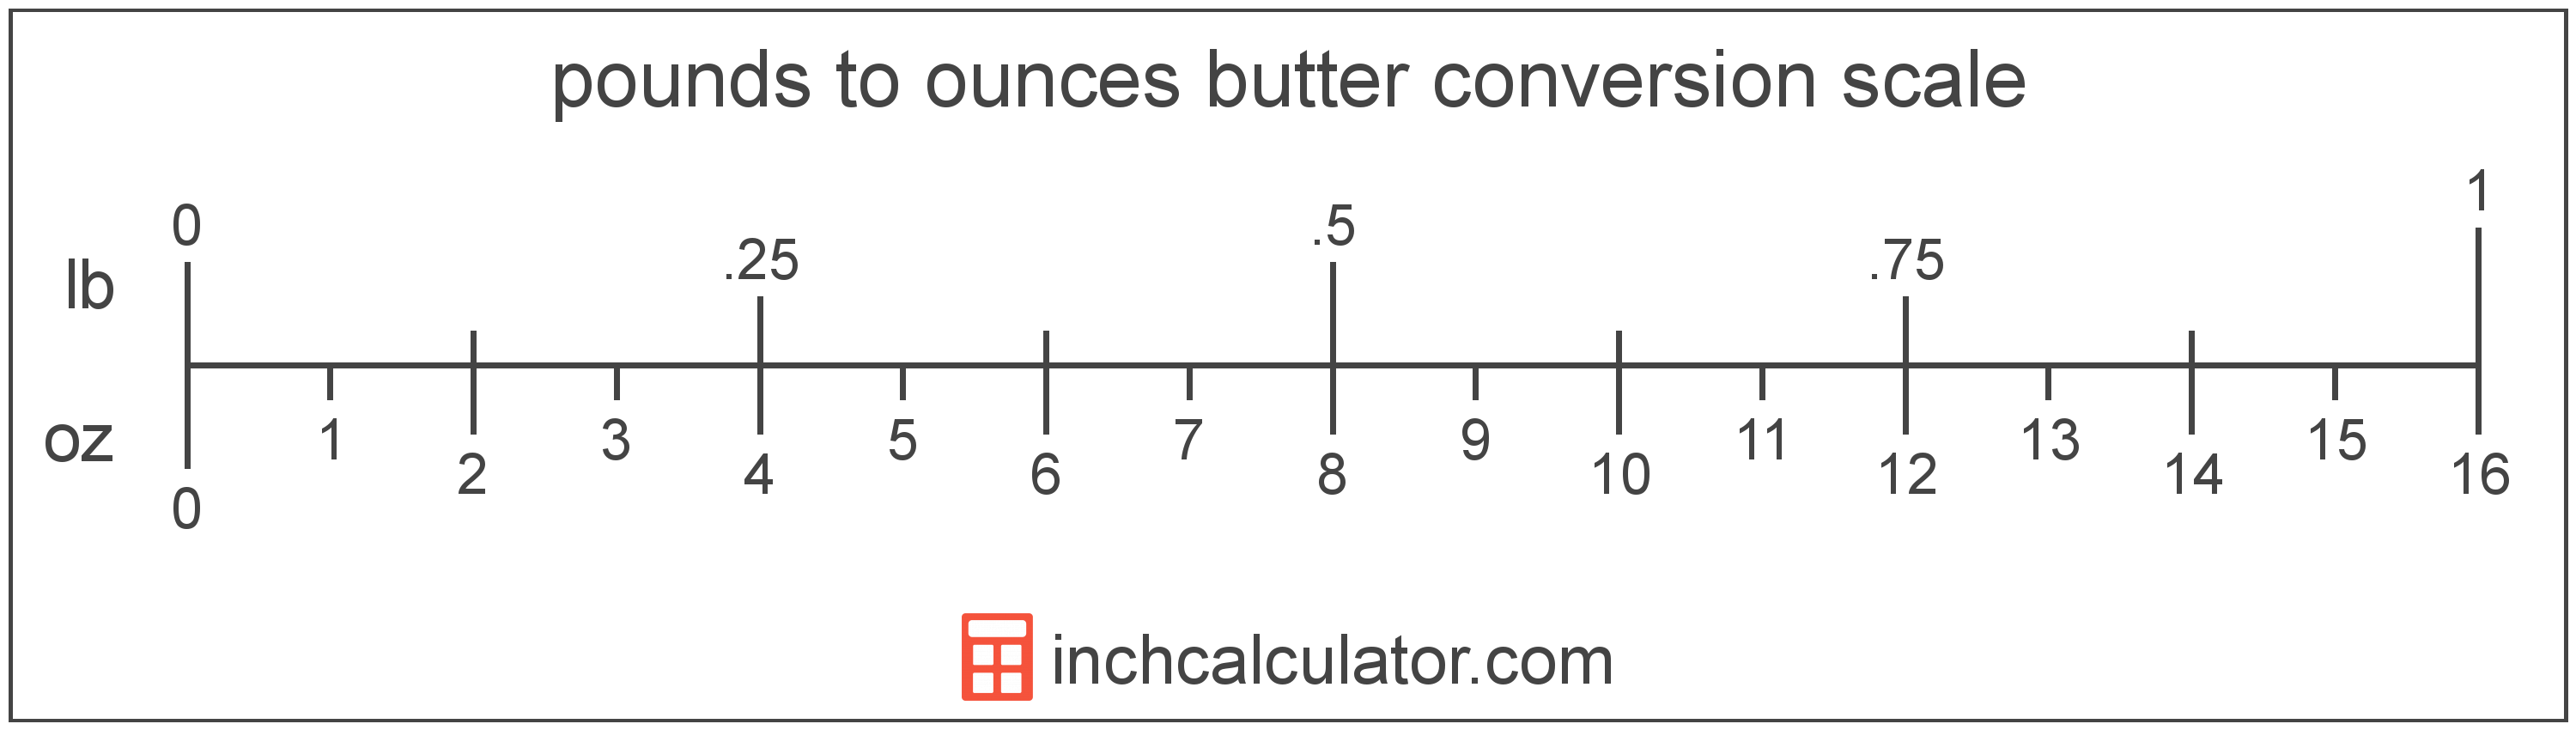 conversion scale showing ounces and equivalent pounds butter values